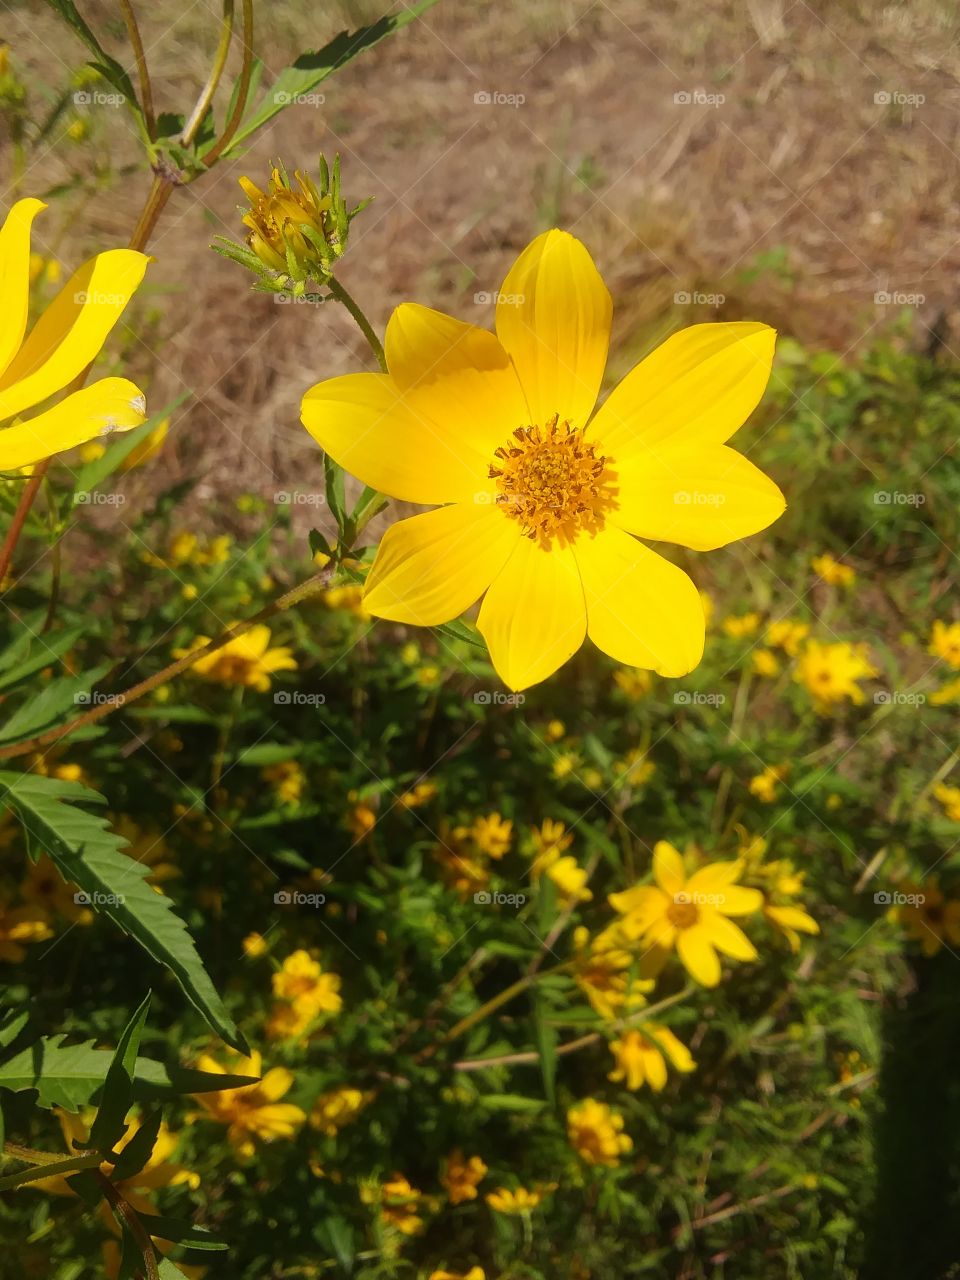 yellow wild flowers give a yellow hue